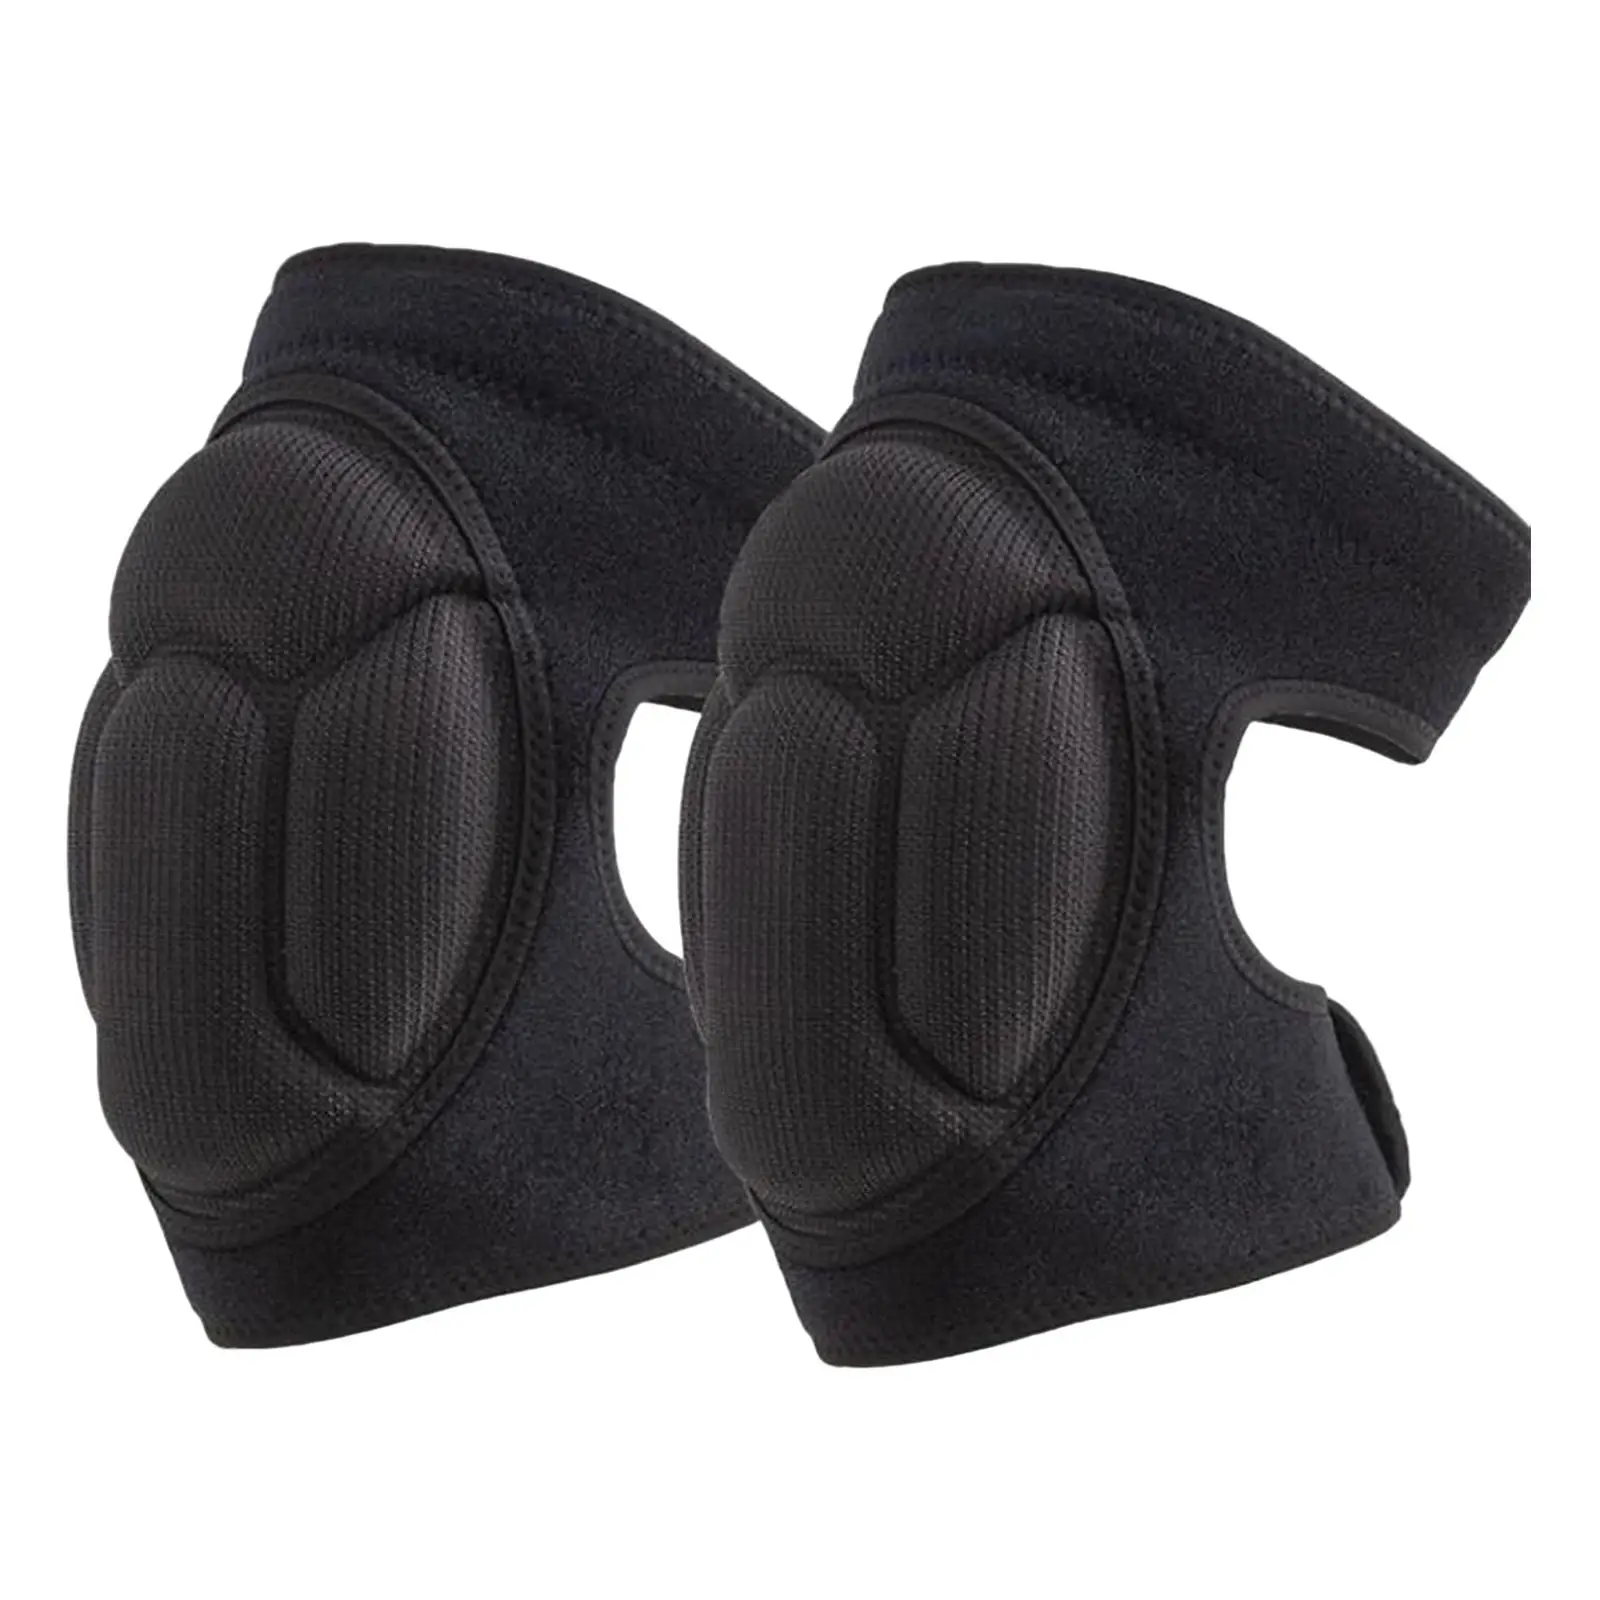 Knee Pads Breathable Basketball Gardening Cleaning Working Protector Sleeve